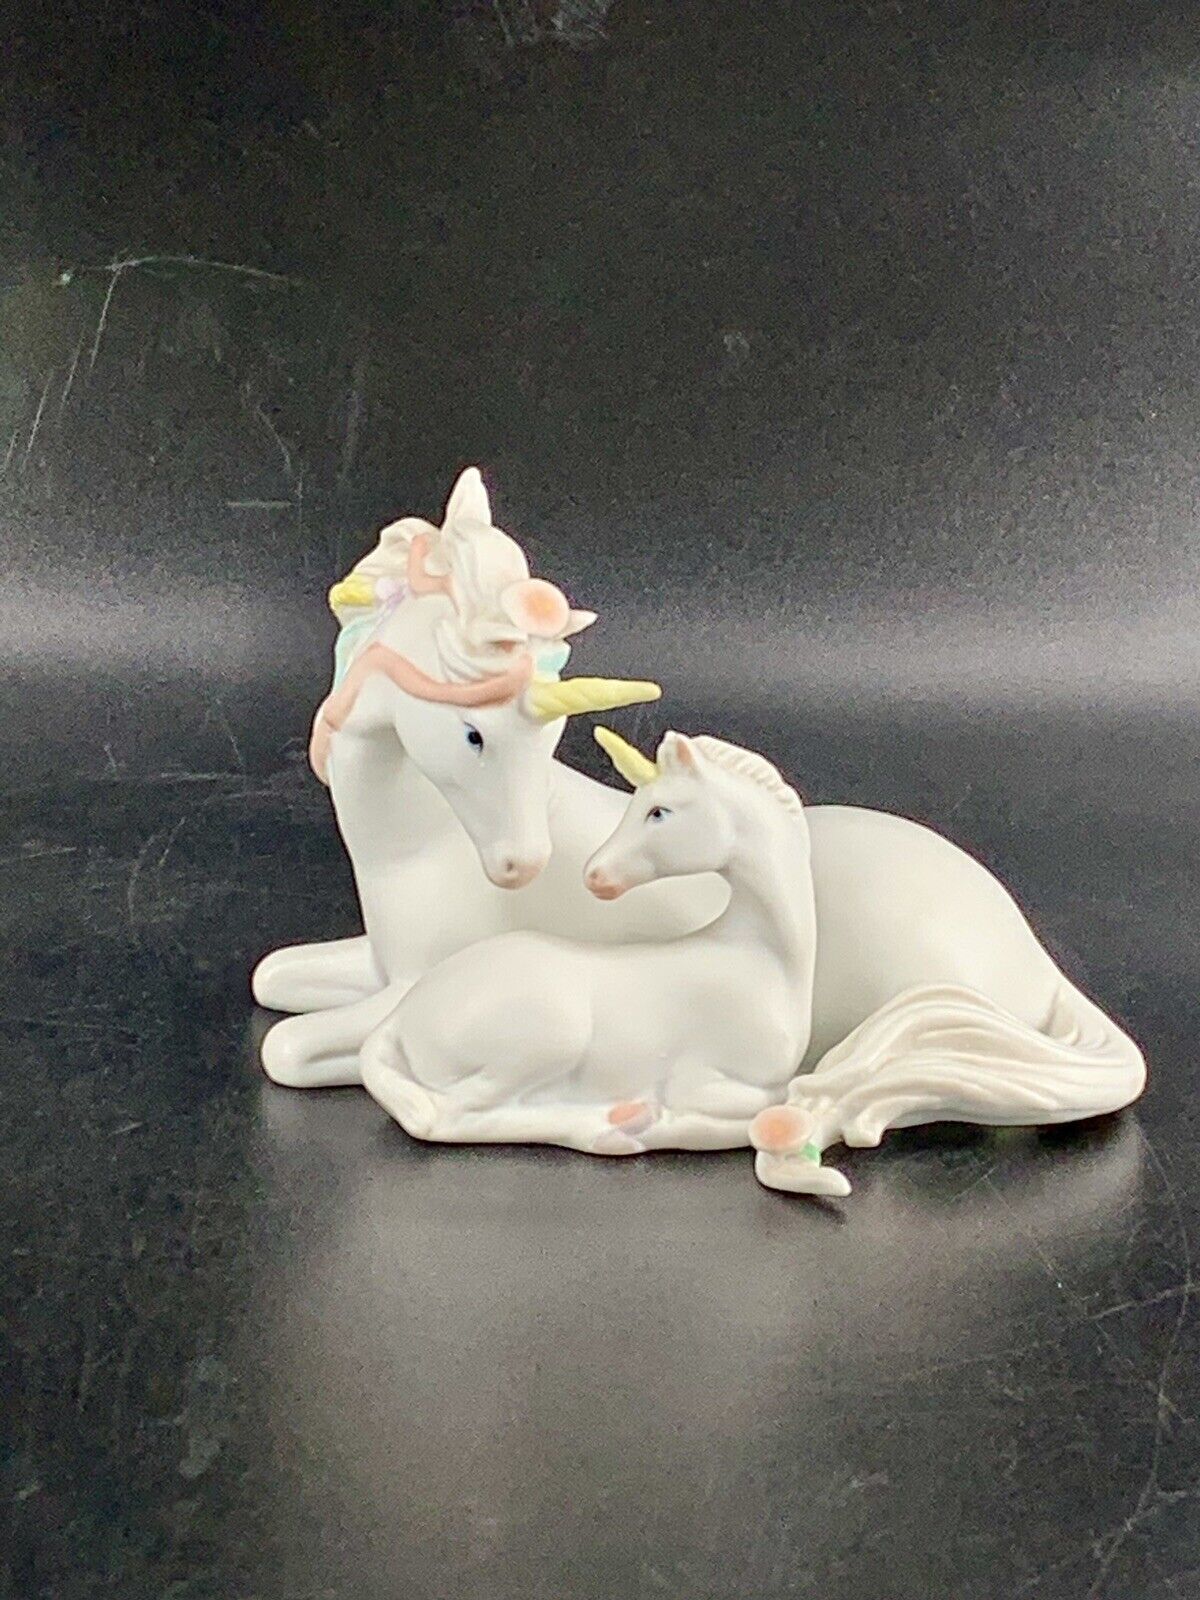 Vintage 1987 Enesco Porcelain Unicorn Figurine With Baby Made in Taiwan